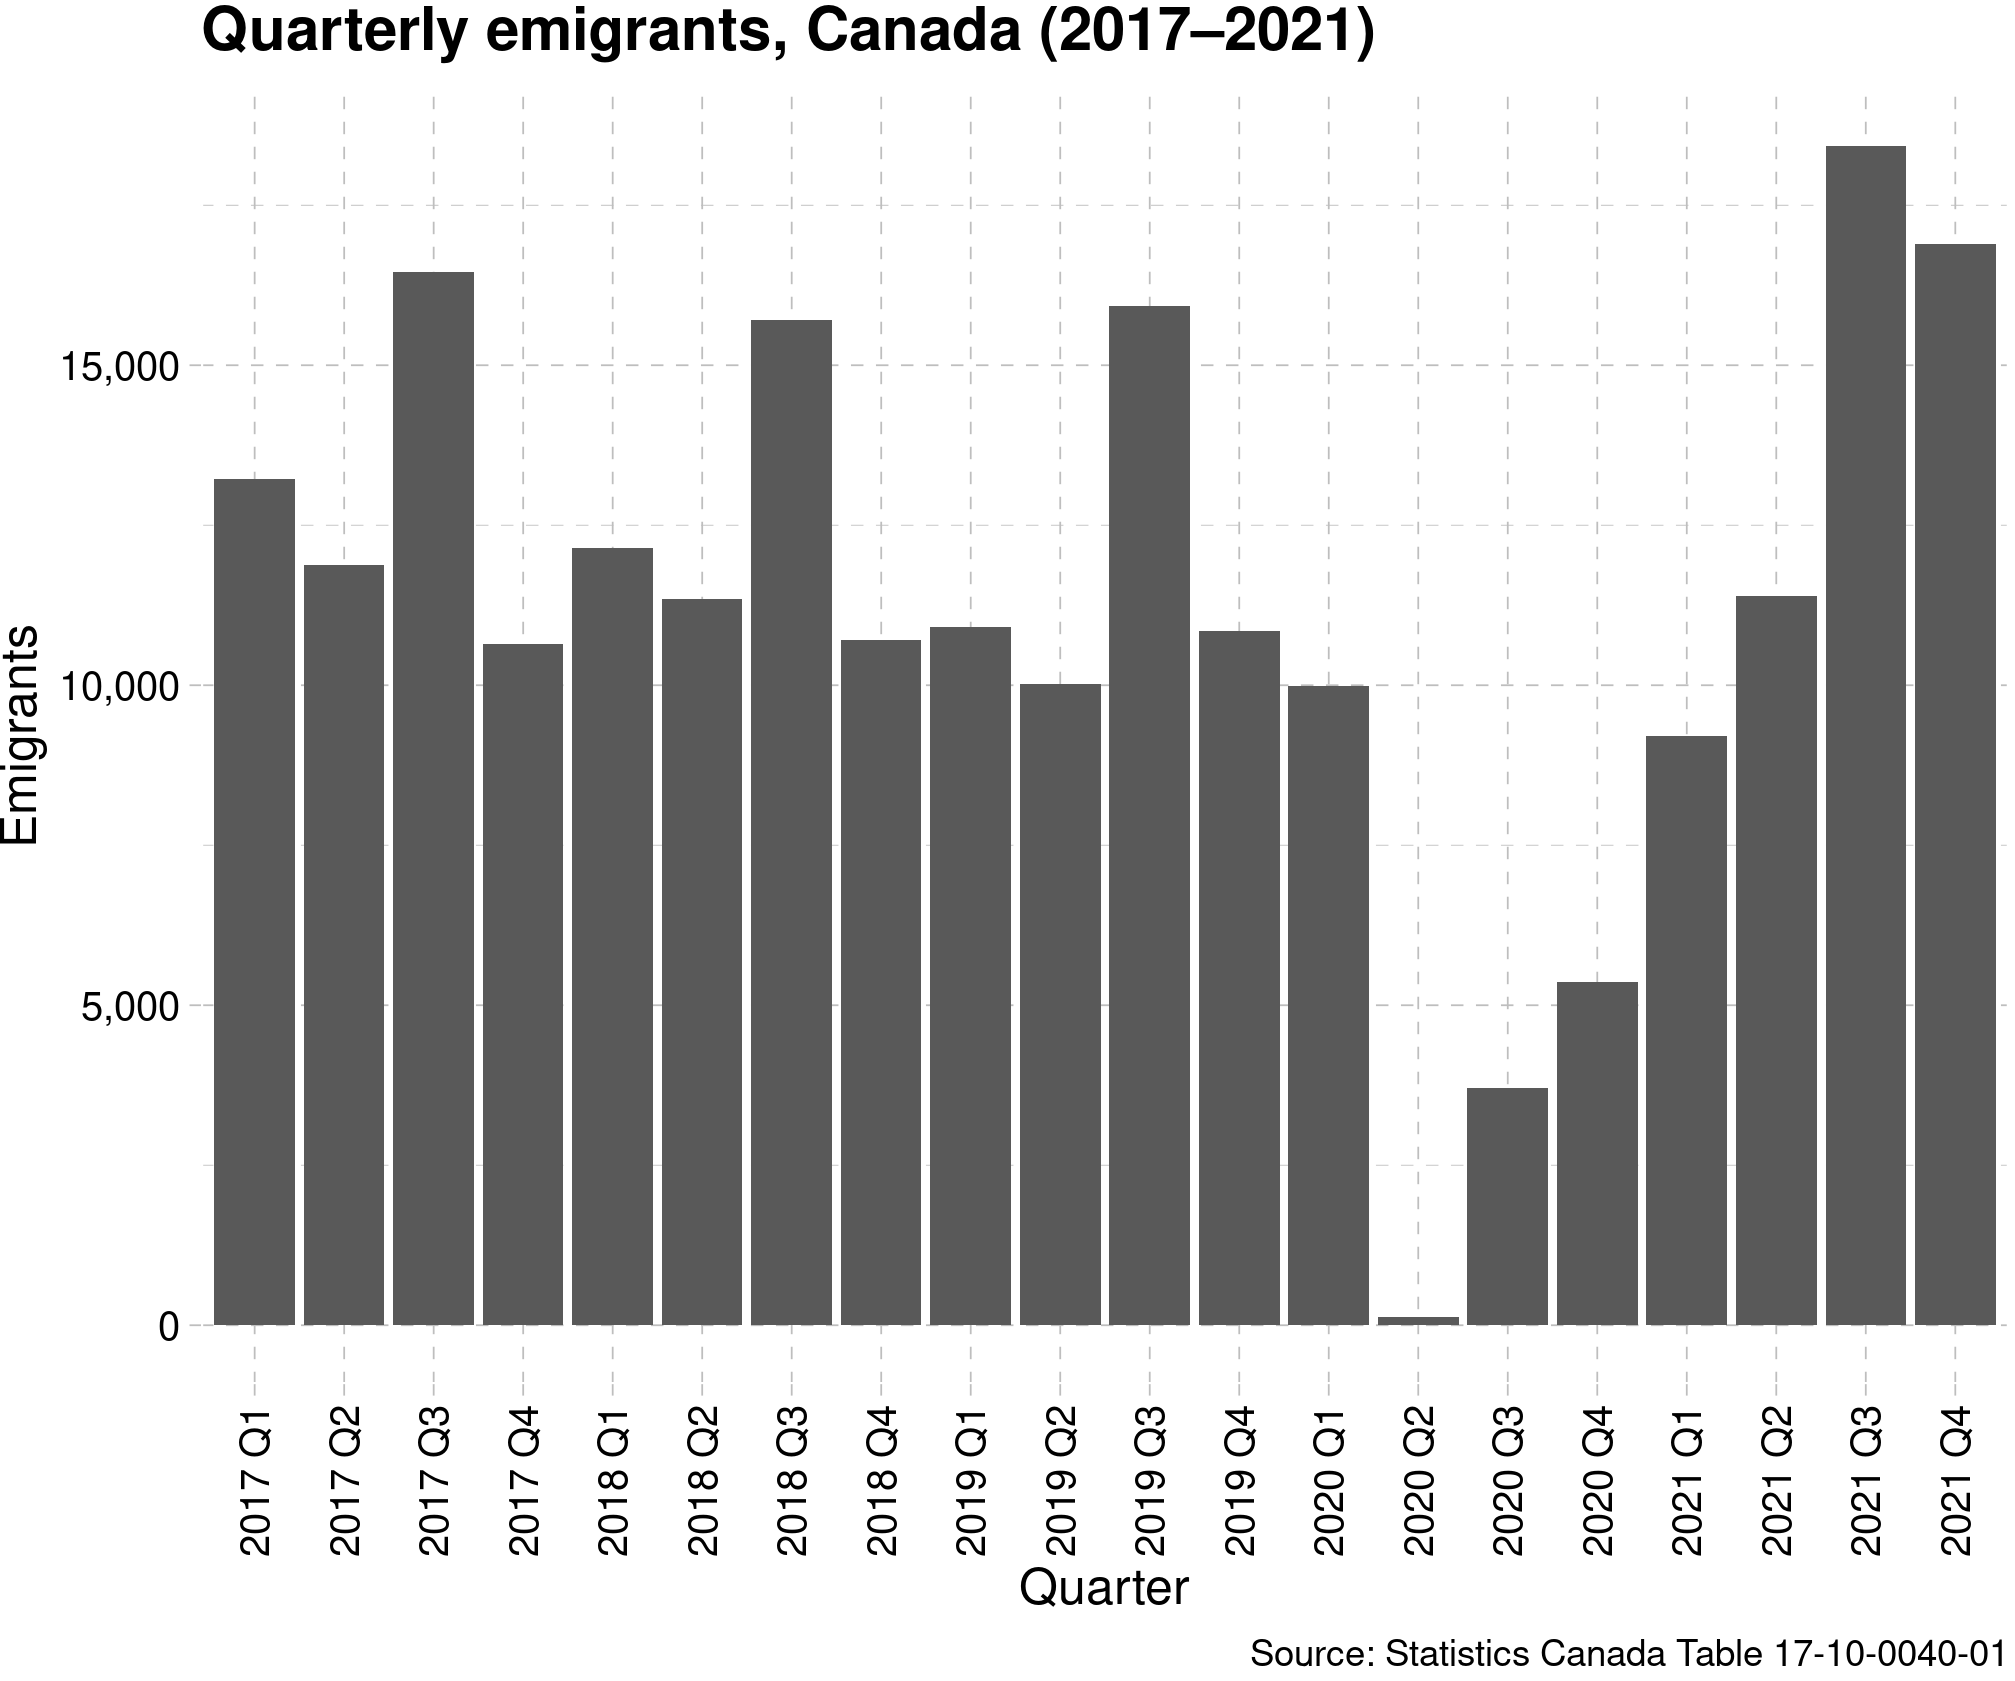 Plot showing quarterly emigration from Canada, from 2017 to 2021